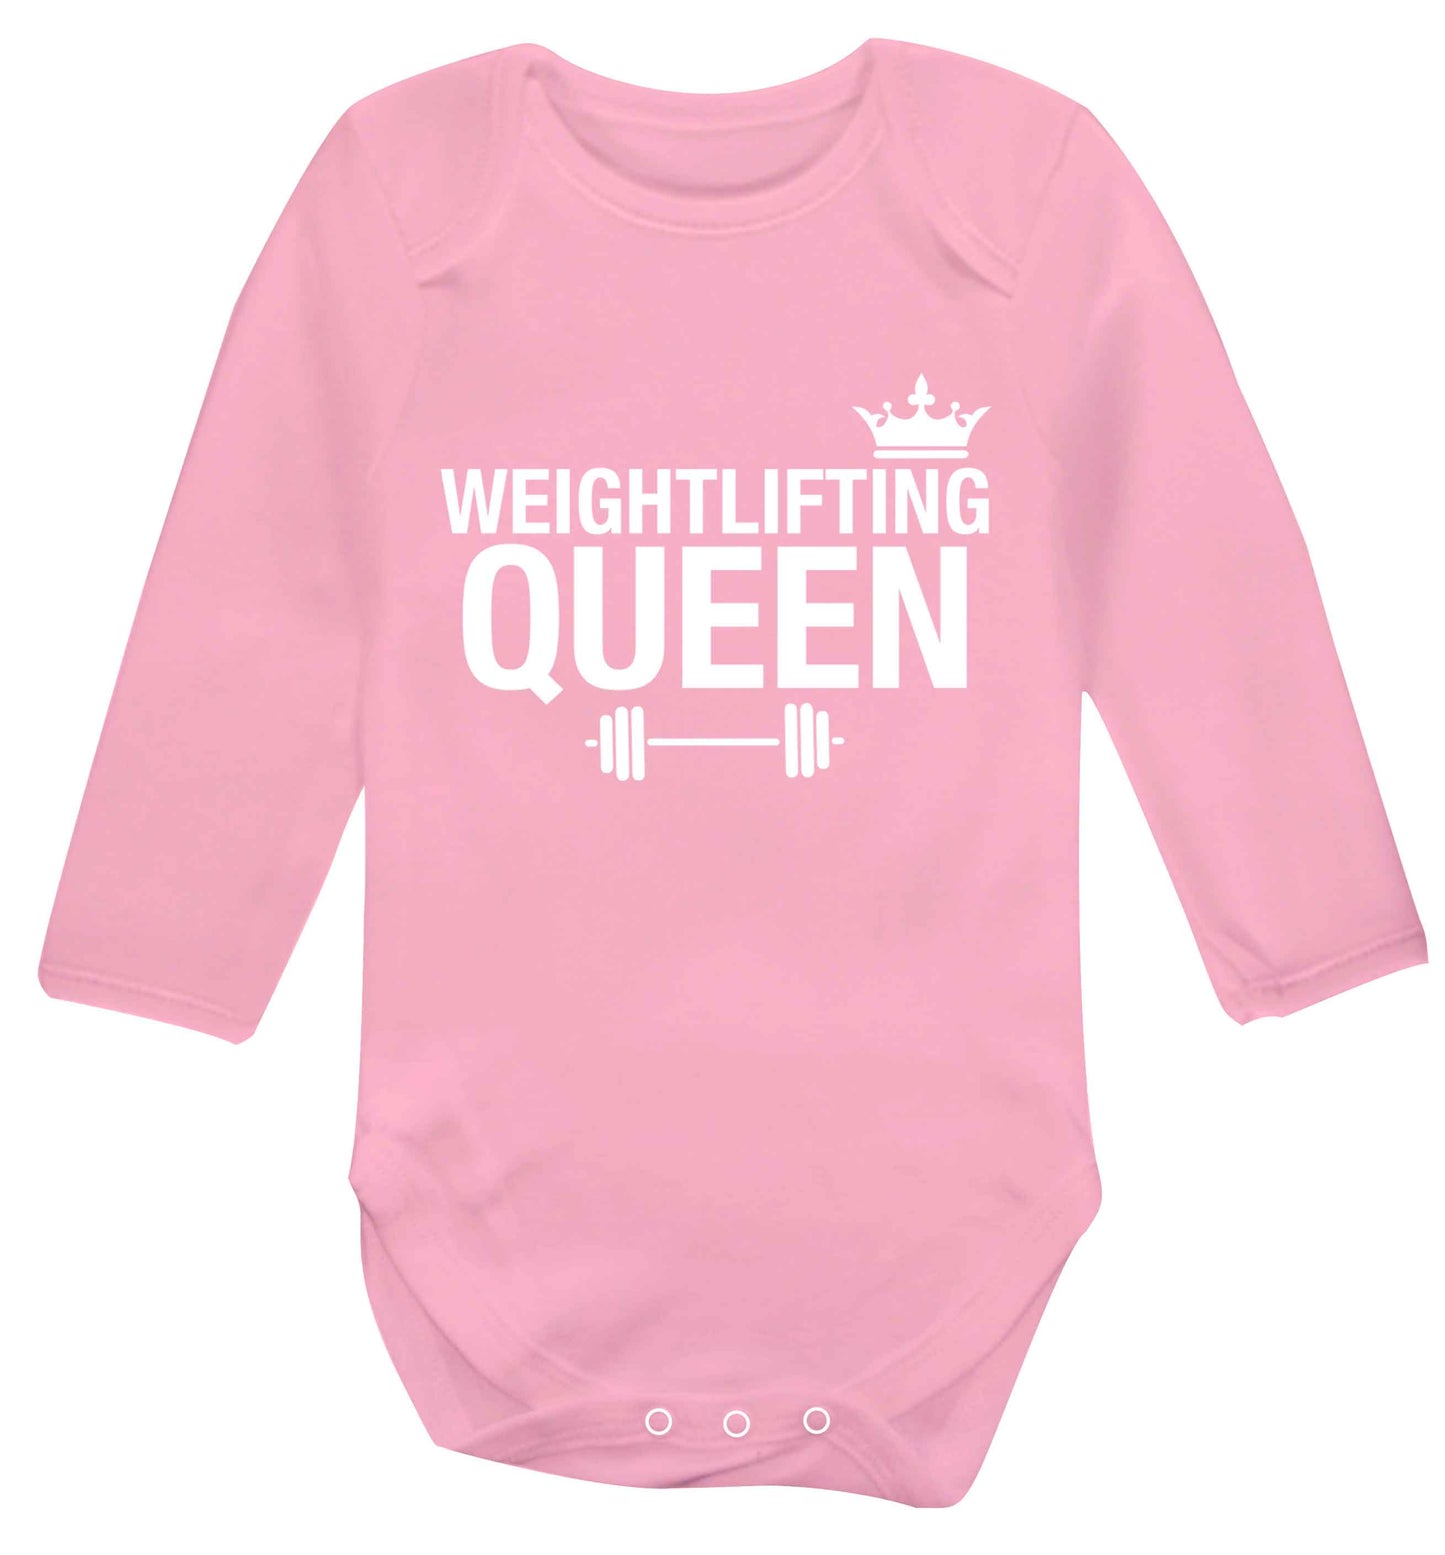 Weightlifting Queen Baby Vest long sleeved pale pink 6-12 months